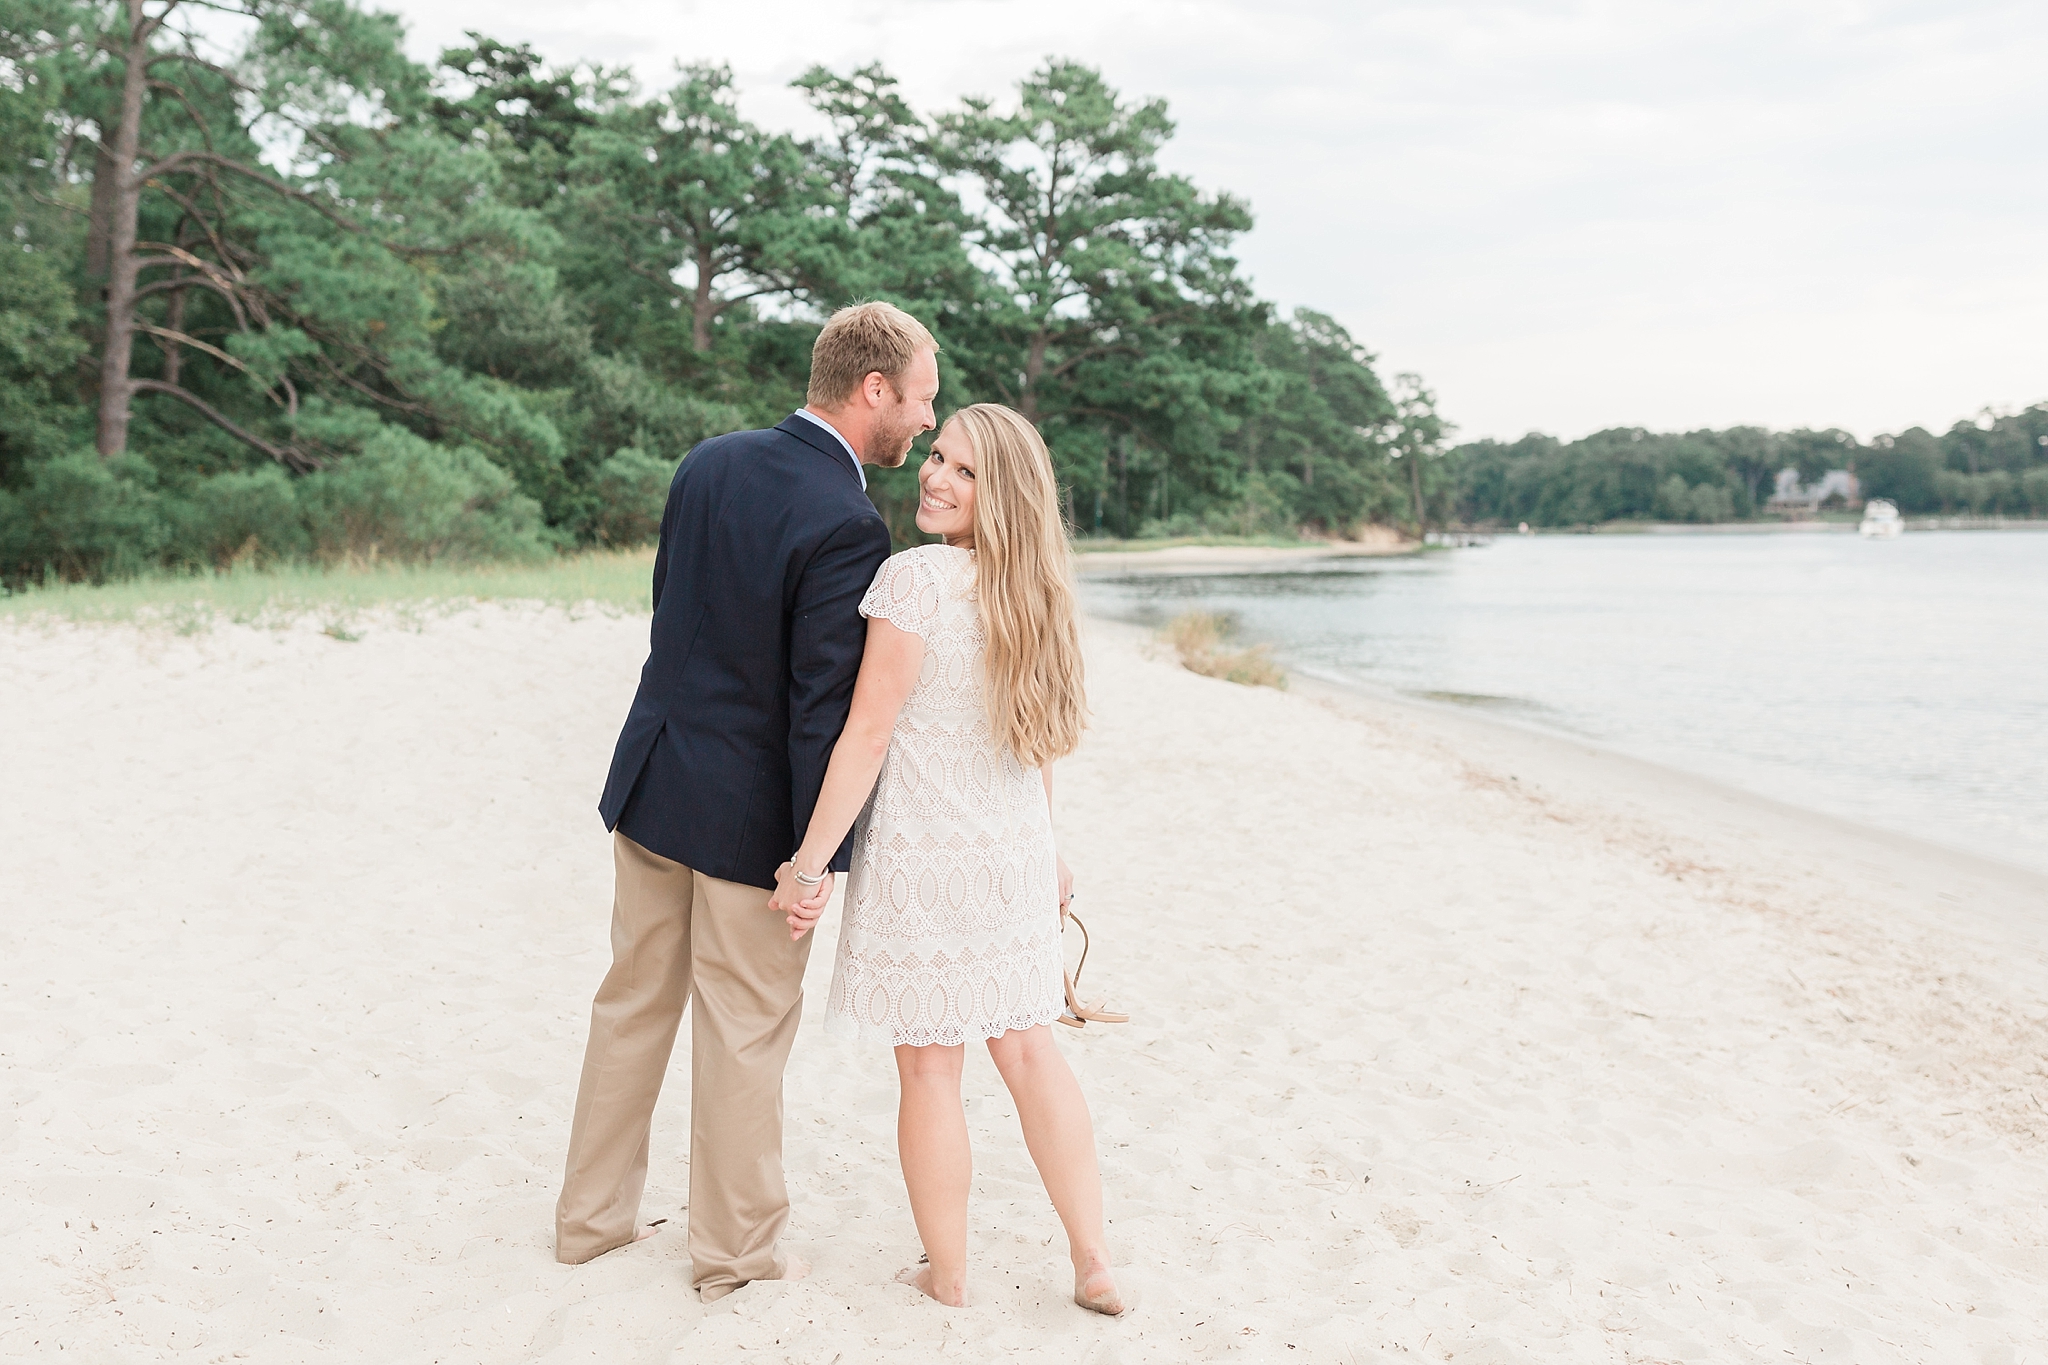 A stylish engagement session is held in the iconic spanish moss and beachfront of First Landing State Park in Virginia.